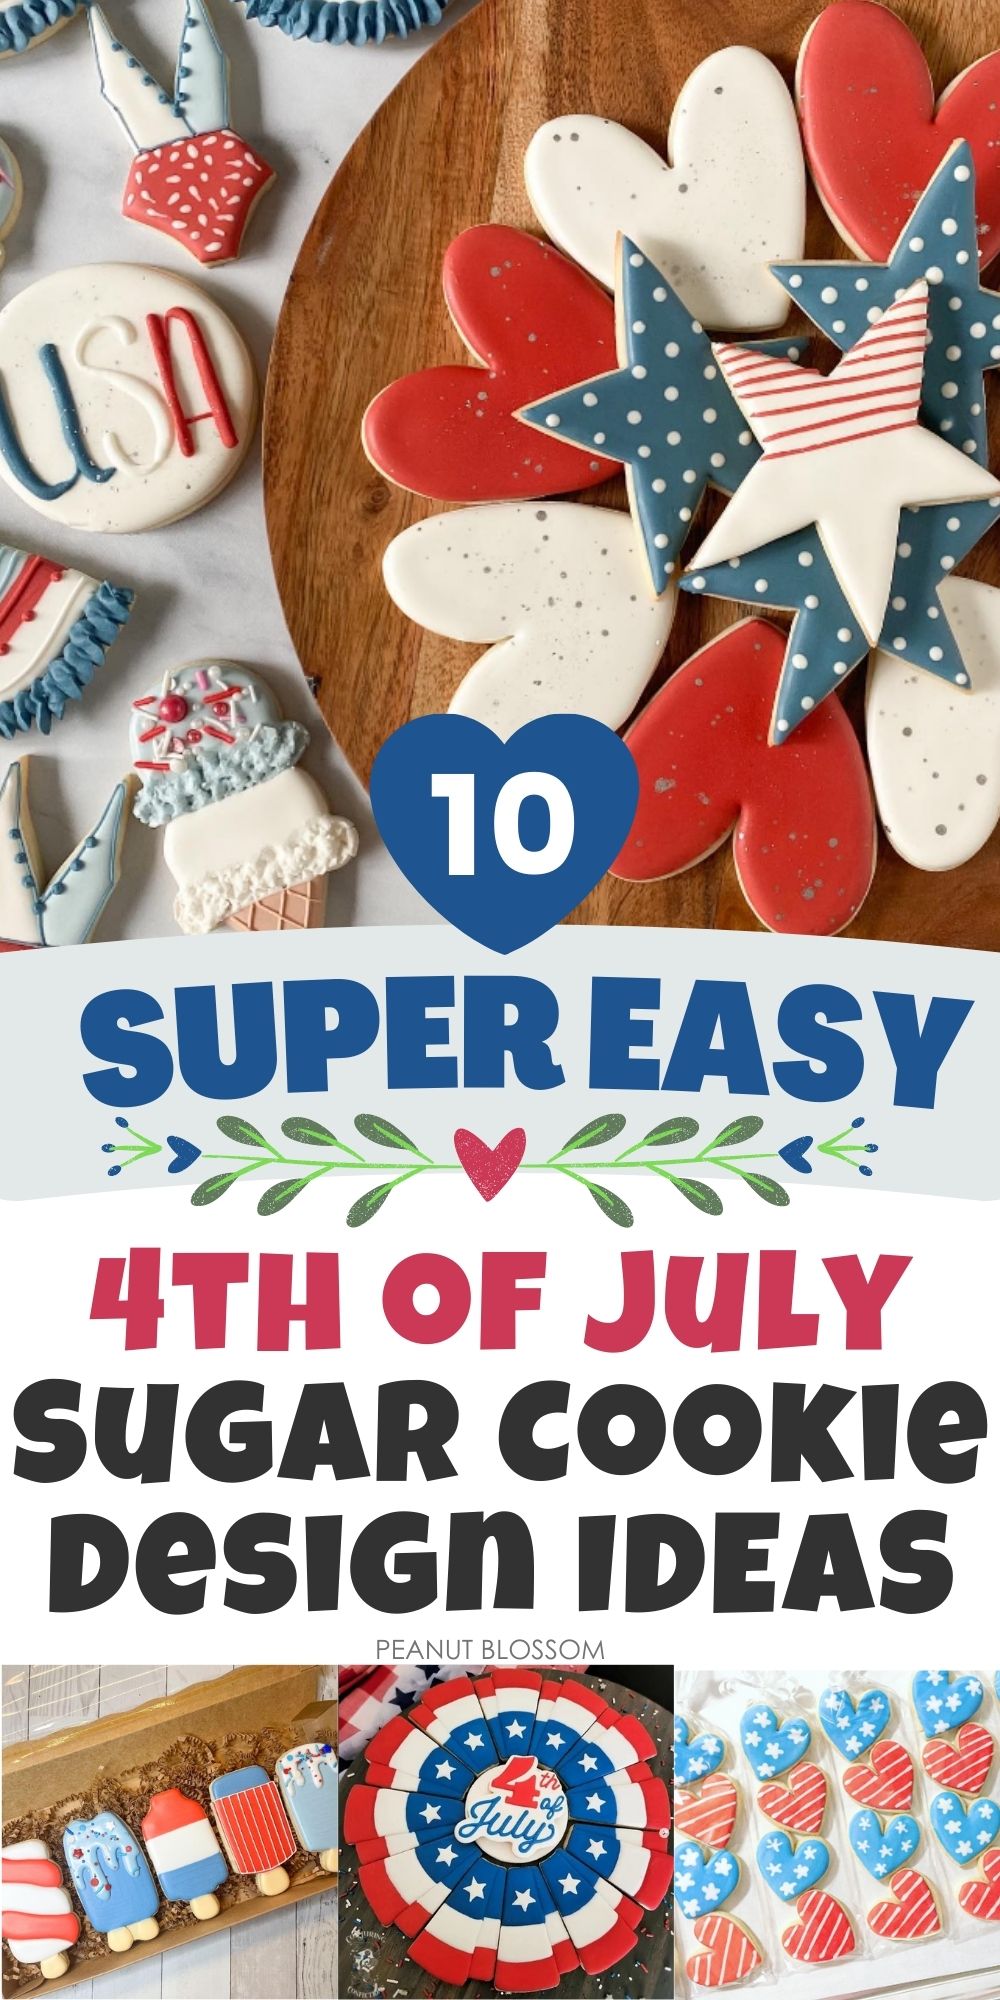 A photo collage shows several of the easy sugar cookie designs for the fourth of july.